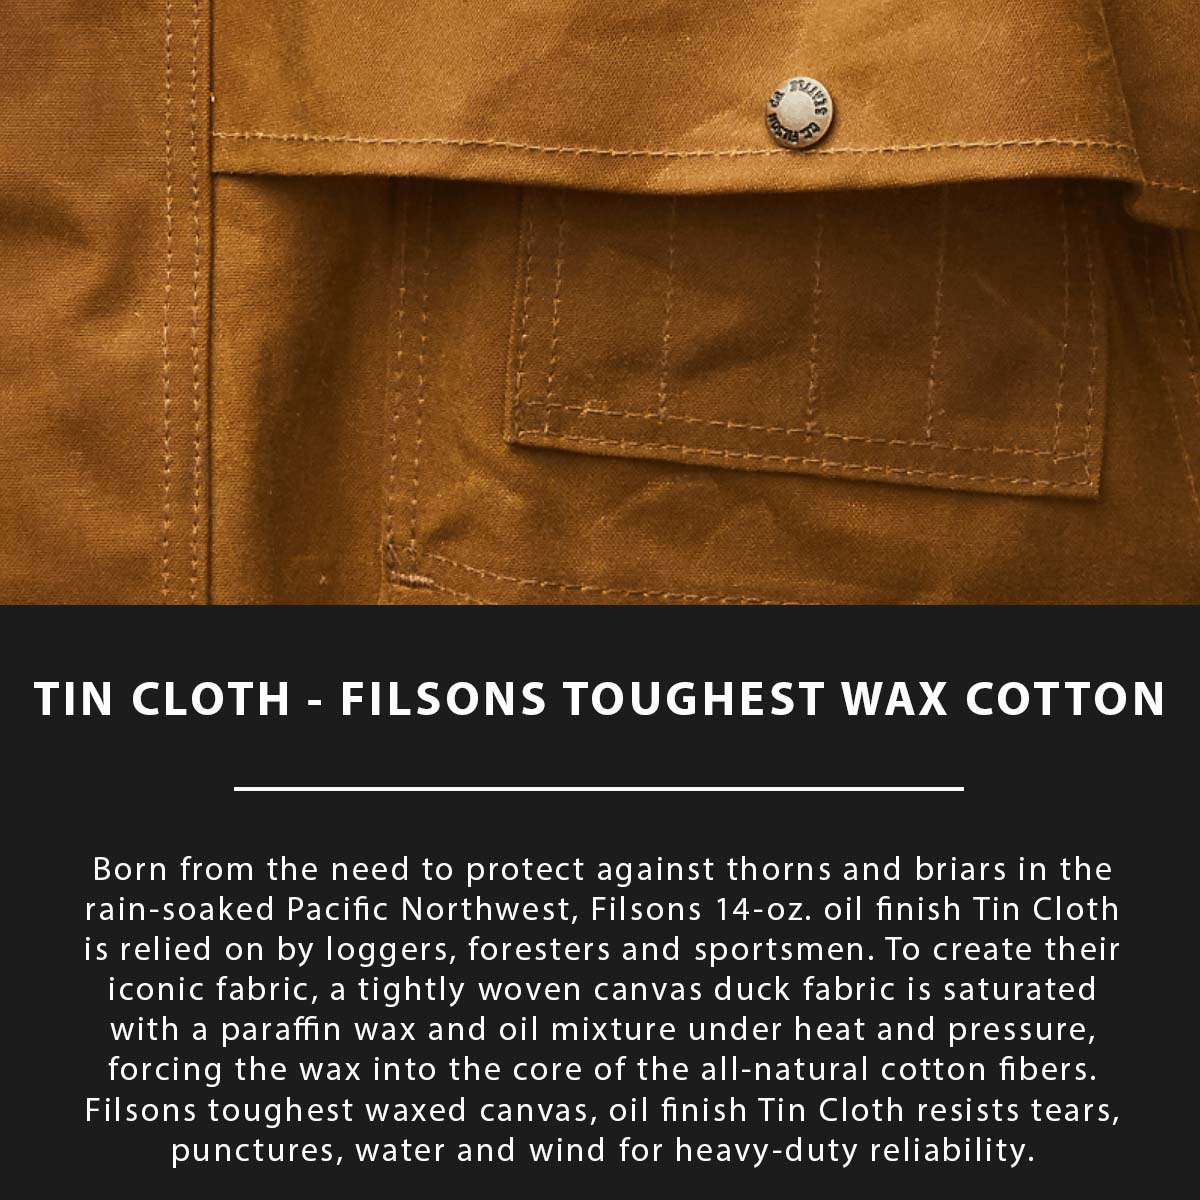 Filson Tin Cloth Insulated Packer Coat, made of the legendary super strong, lightweight, and oil impregnated 14-oz. Tin Cloth canvas